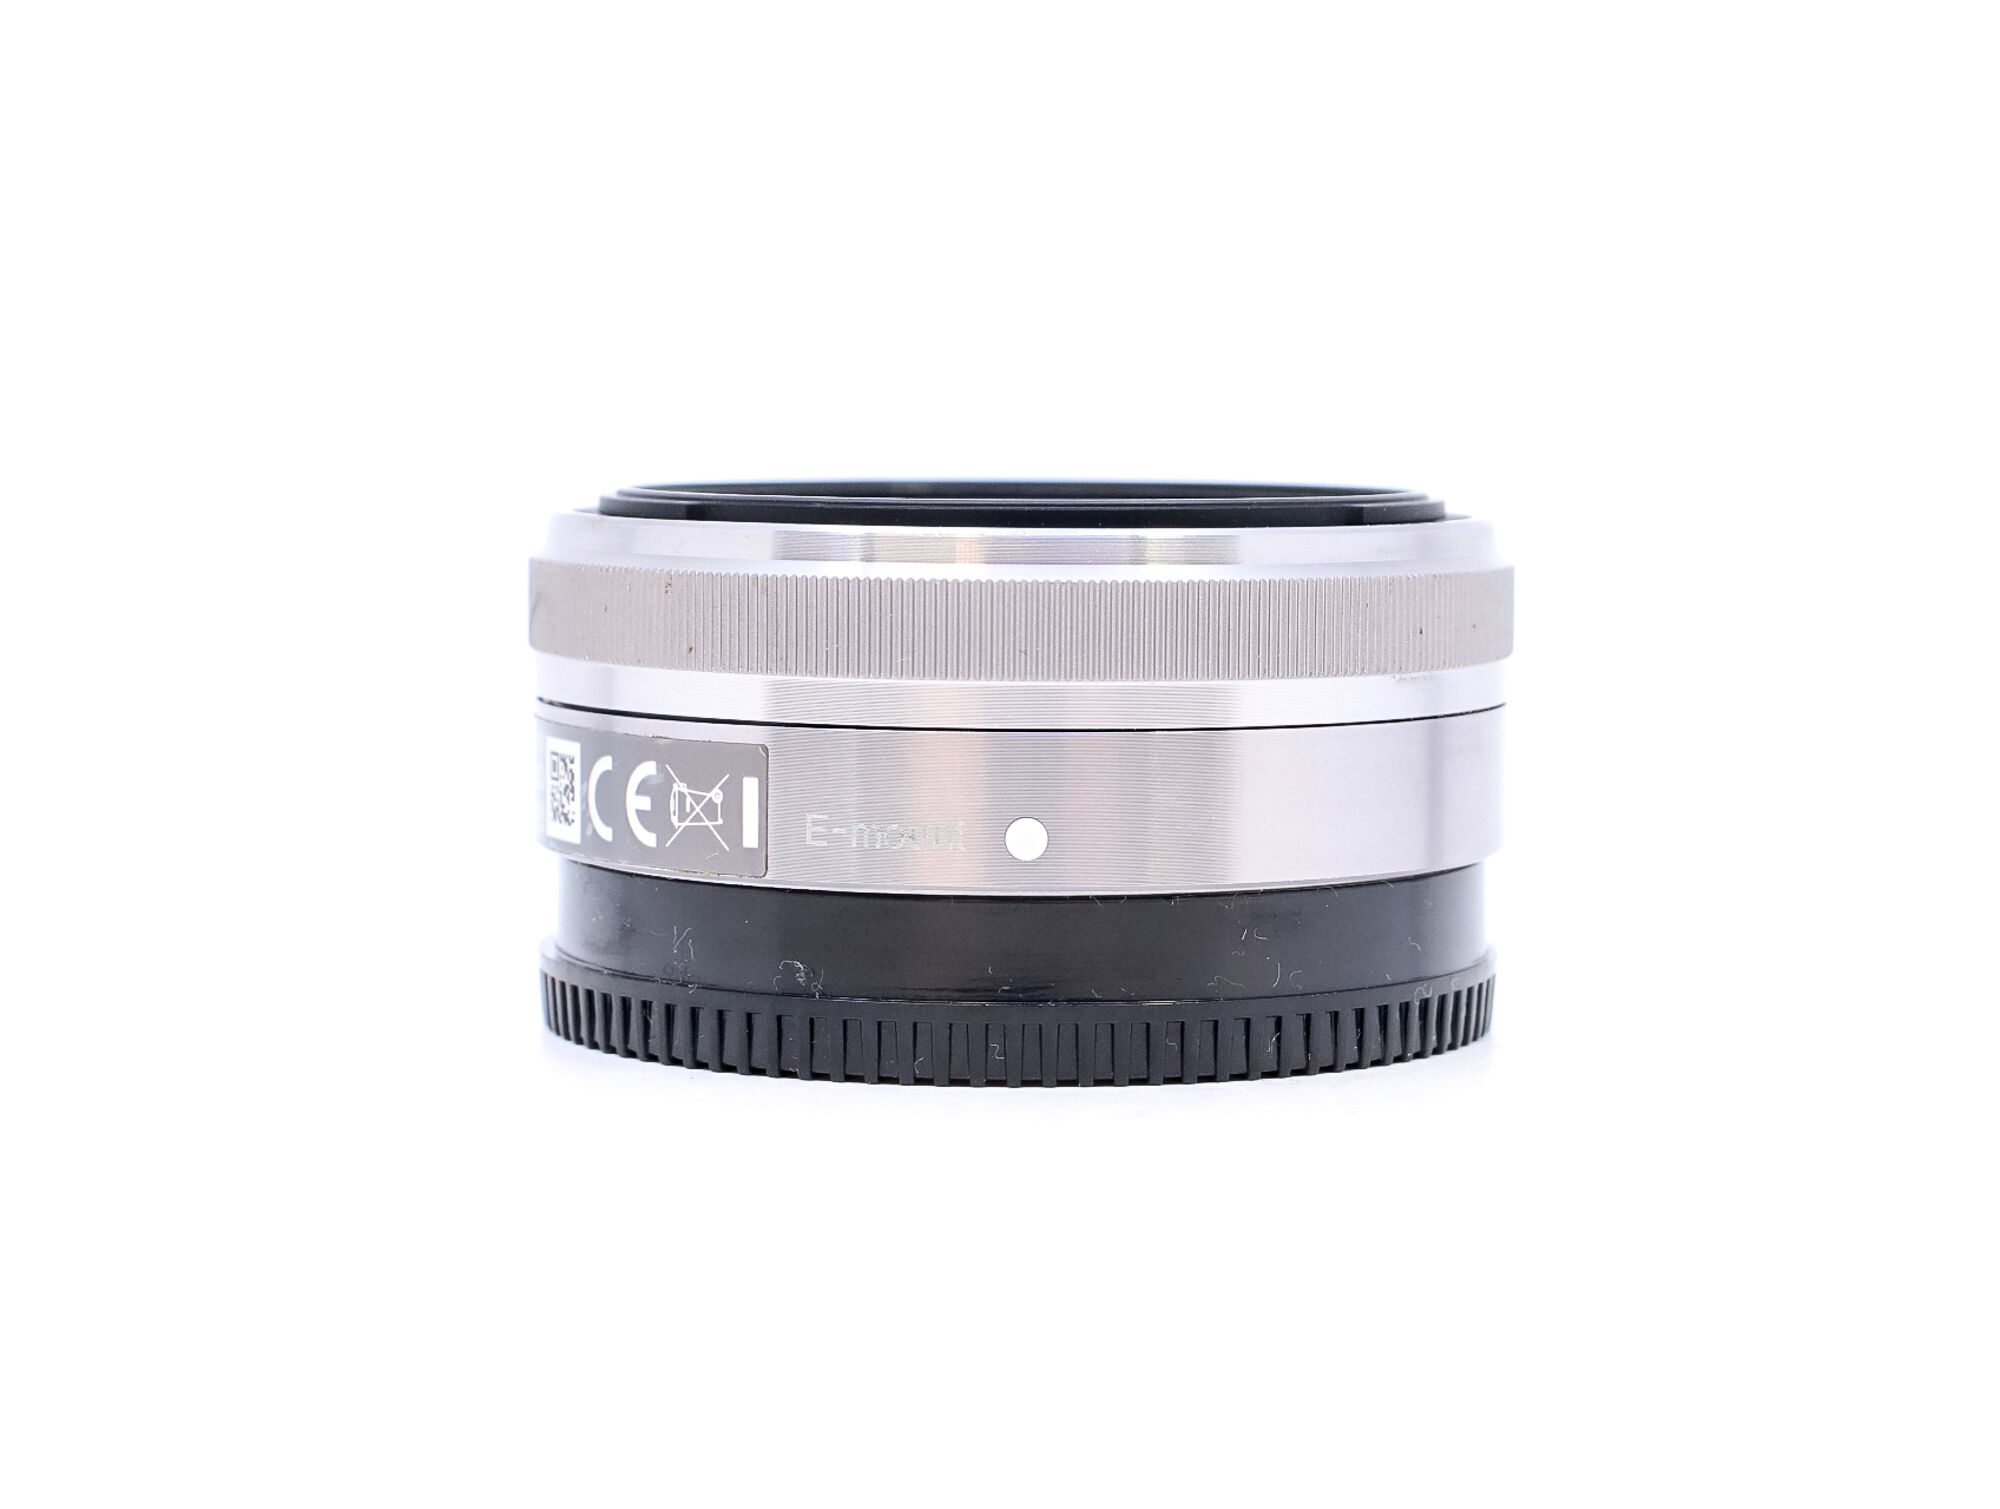 Sony E 16mm f/2.8 (Condition: Excellent)